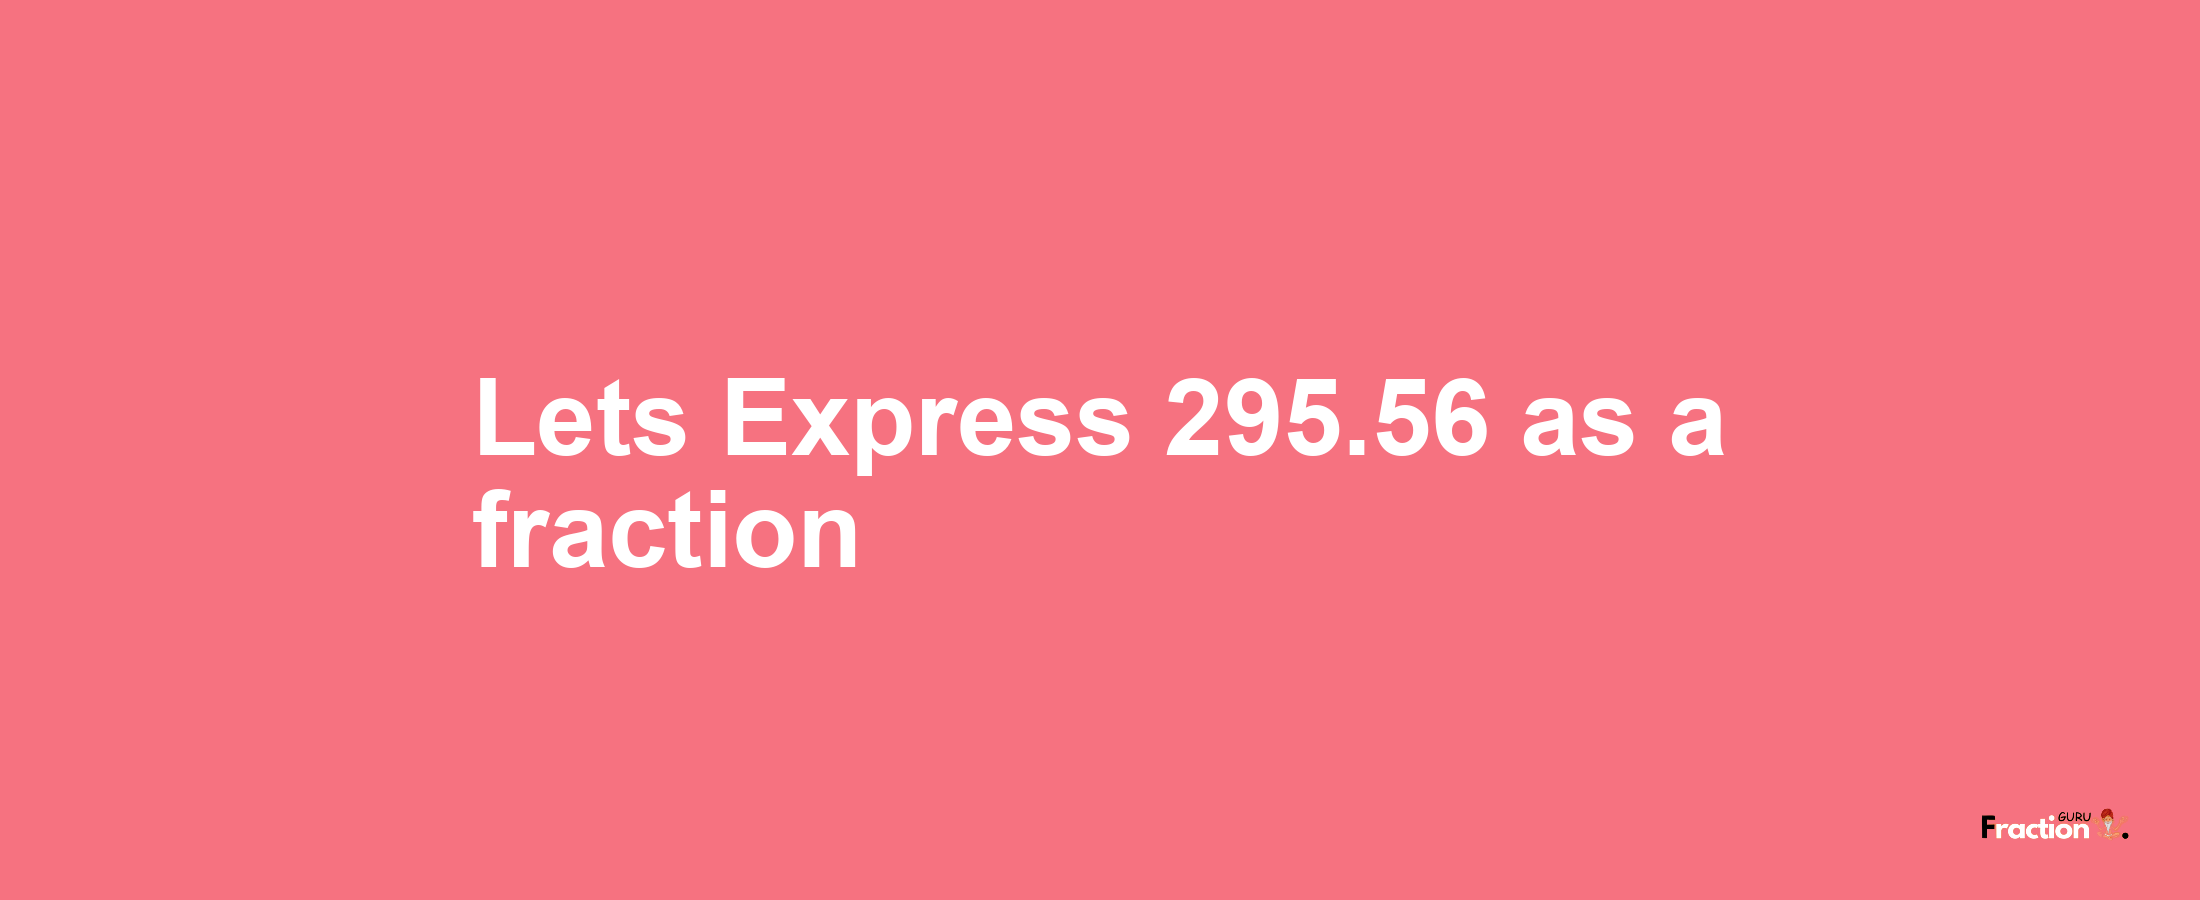 Lets Express 295.56 as afraction